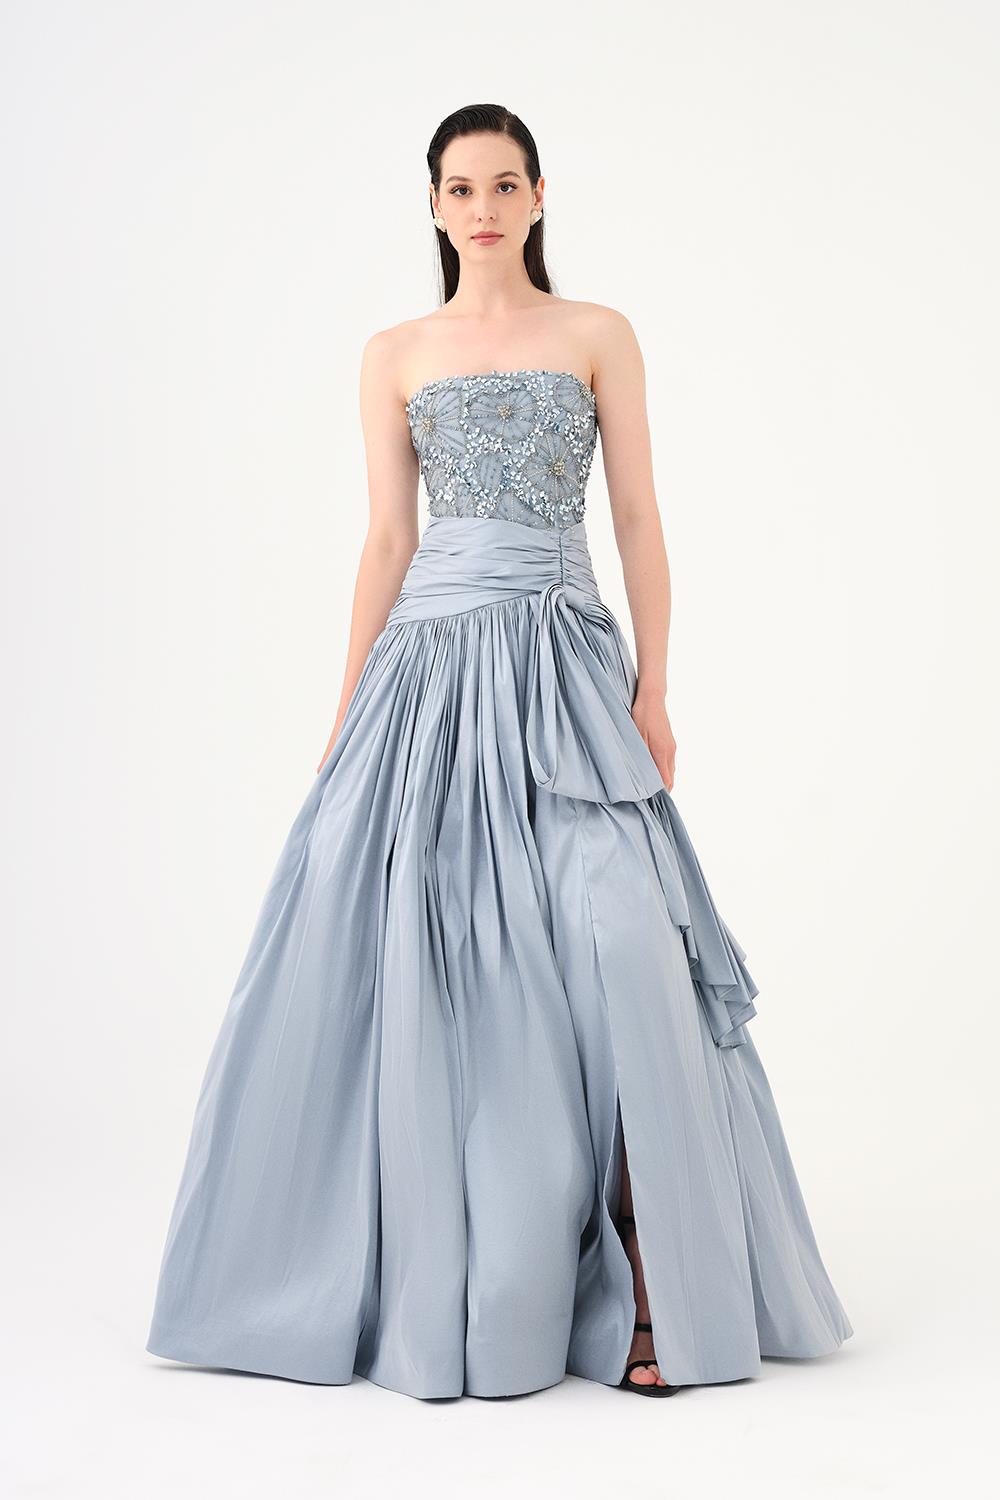 Stone Embroidered Taffeta Long Evening Dress with Slits